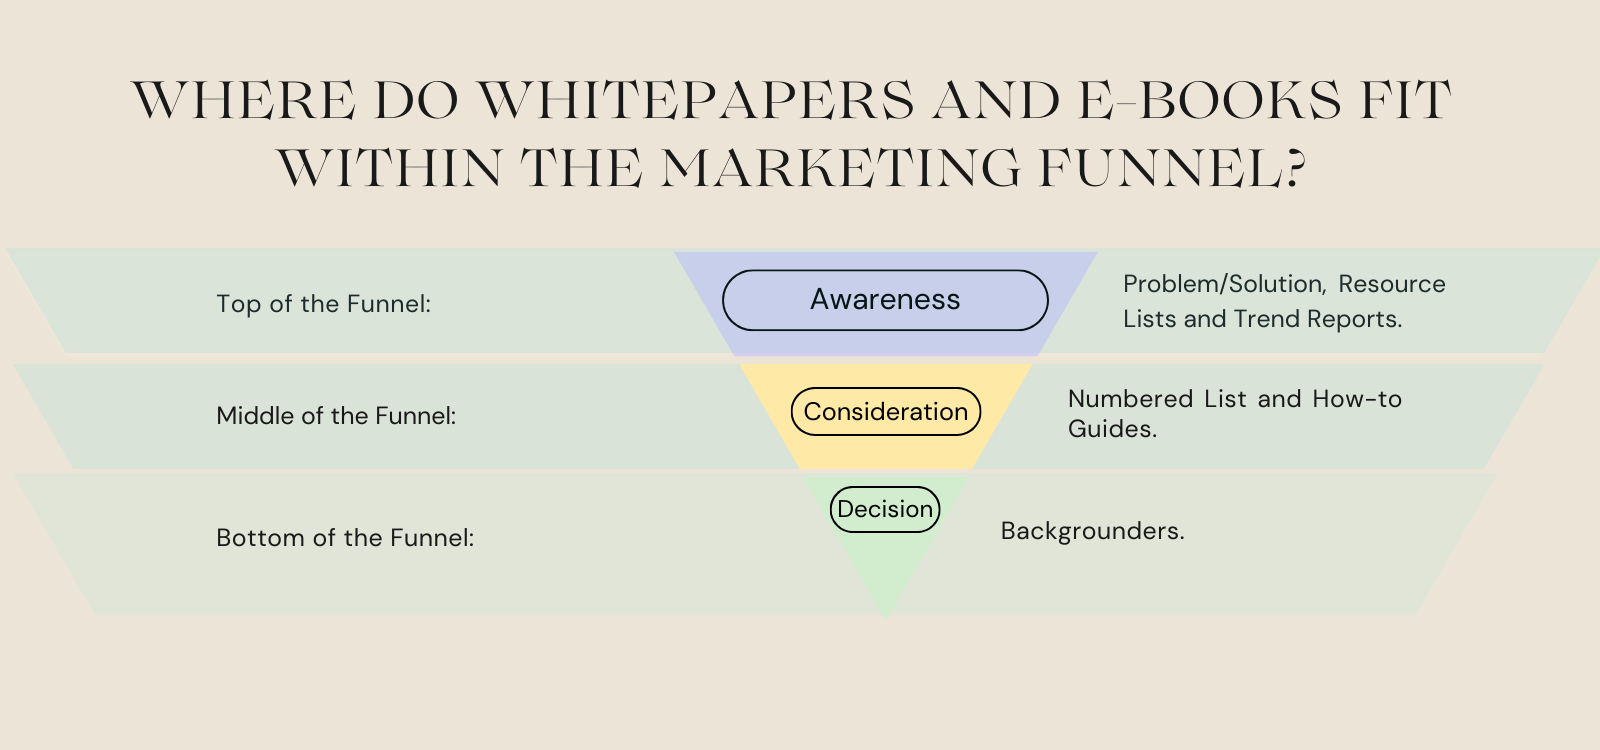 Where whitepapers and e-books fit within the marketing funnel?